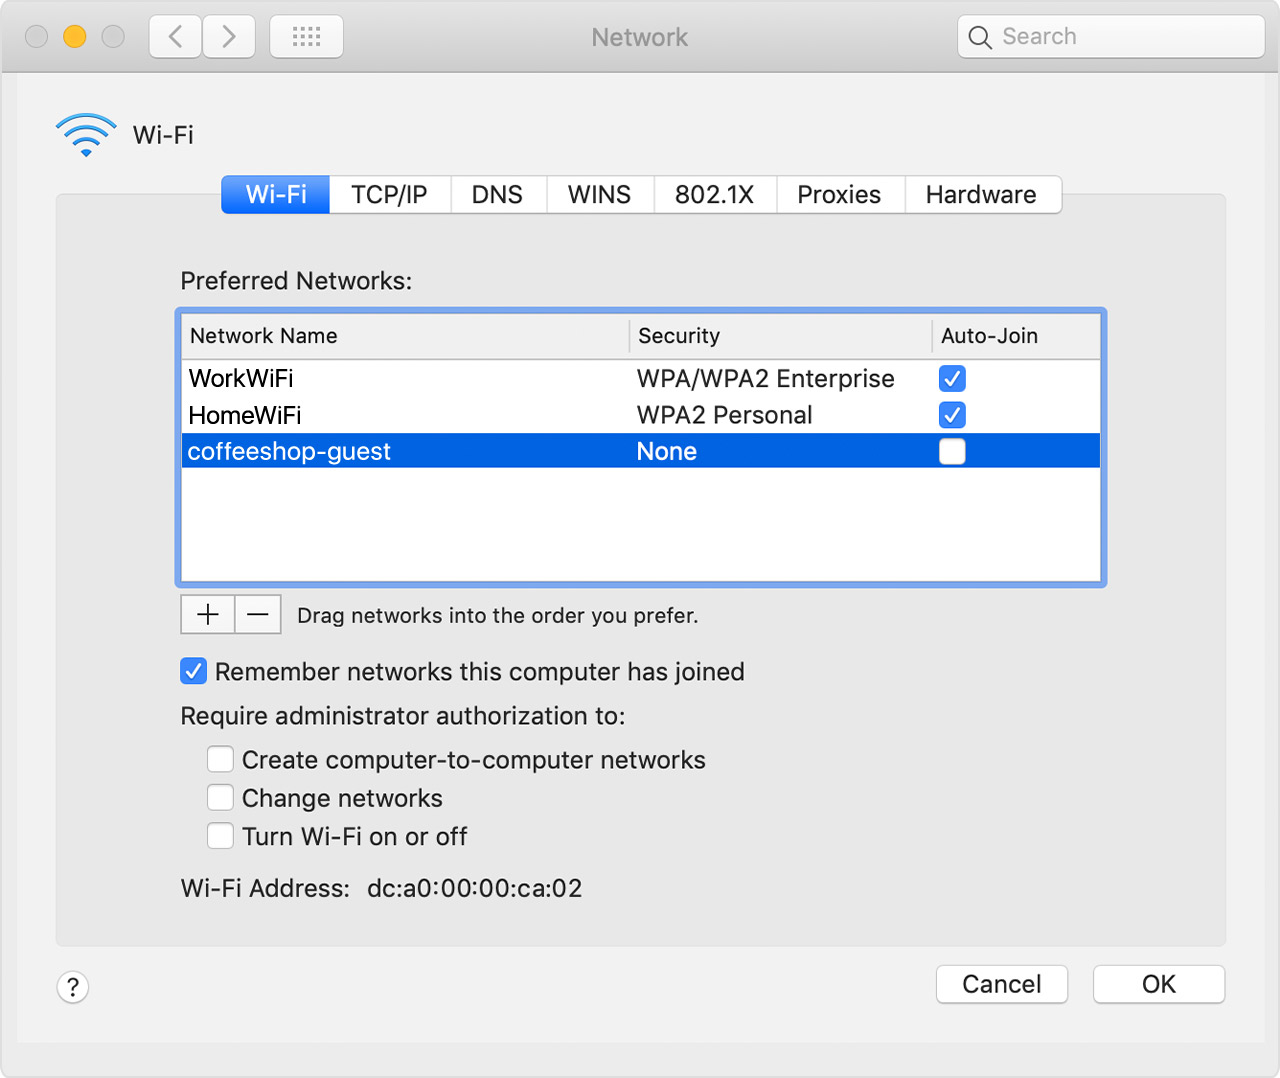 download right networks for mac